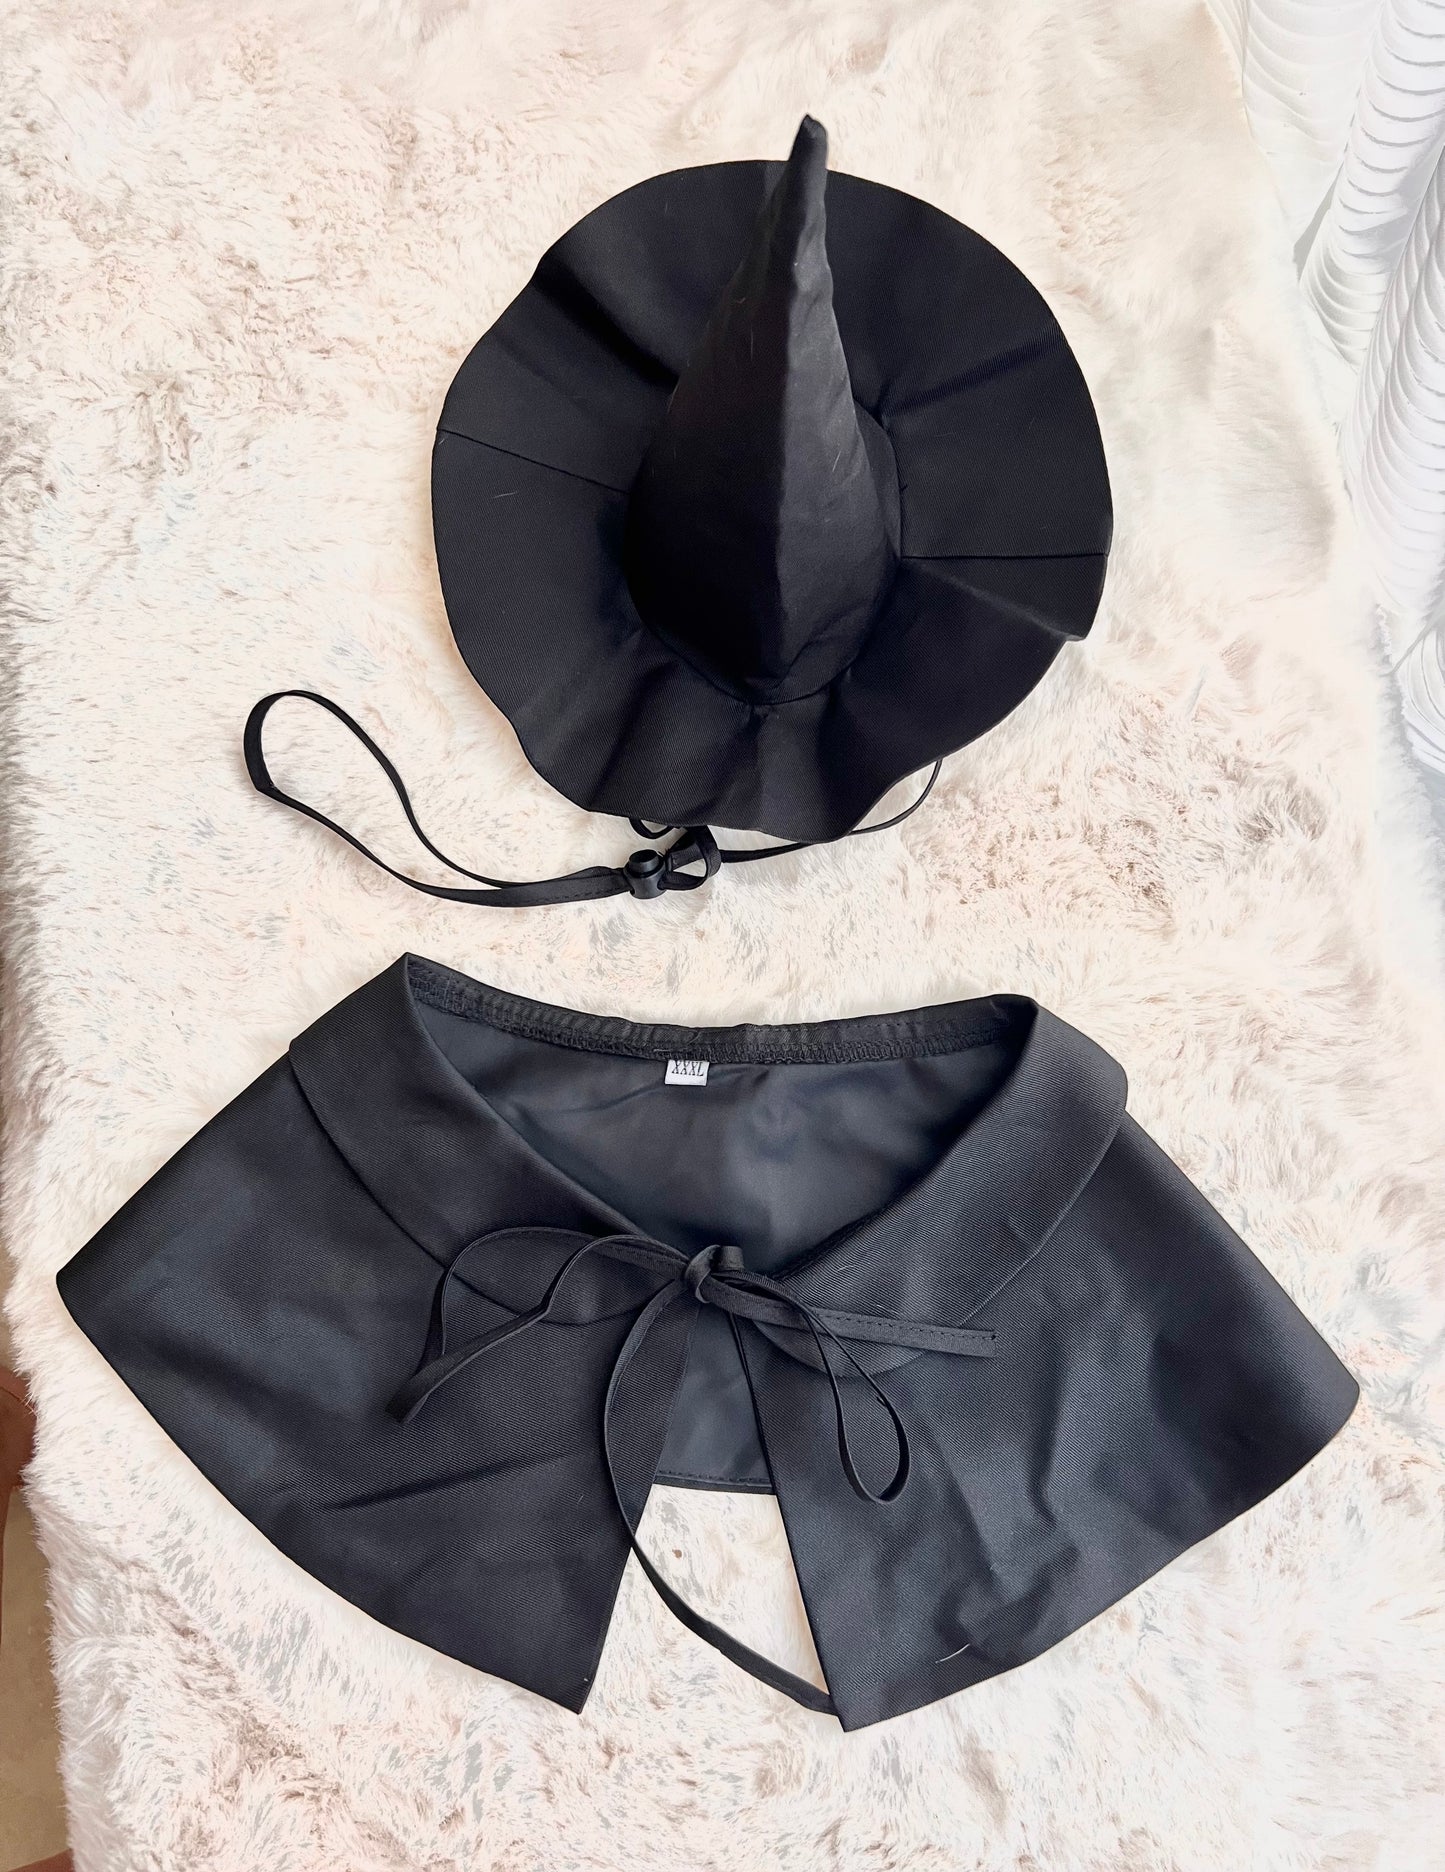 The Witch High Top Hat and Bandana Cloak